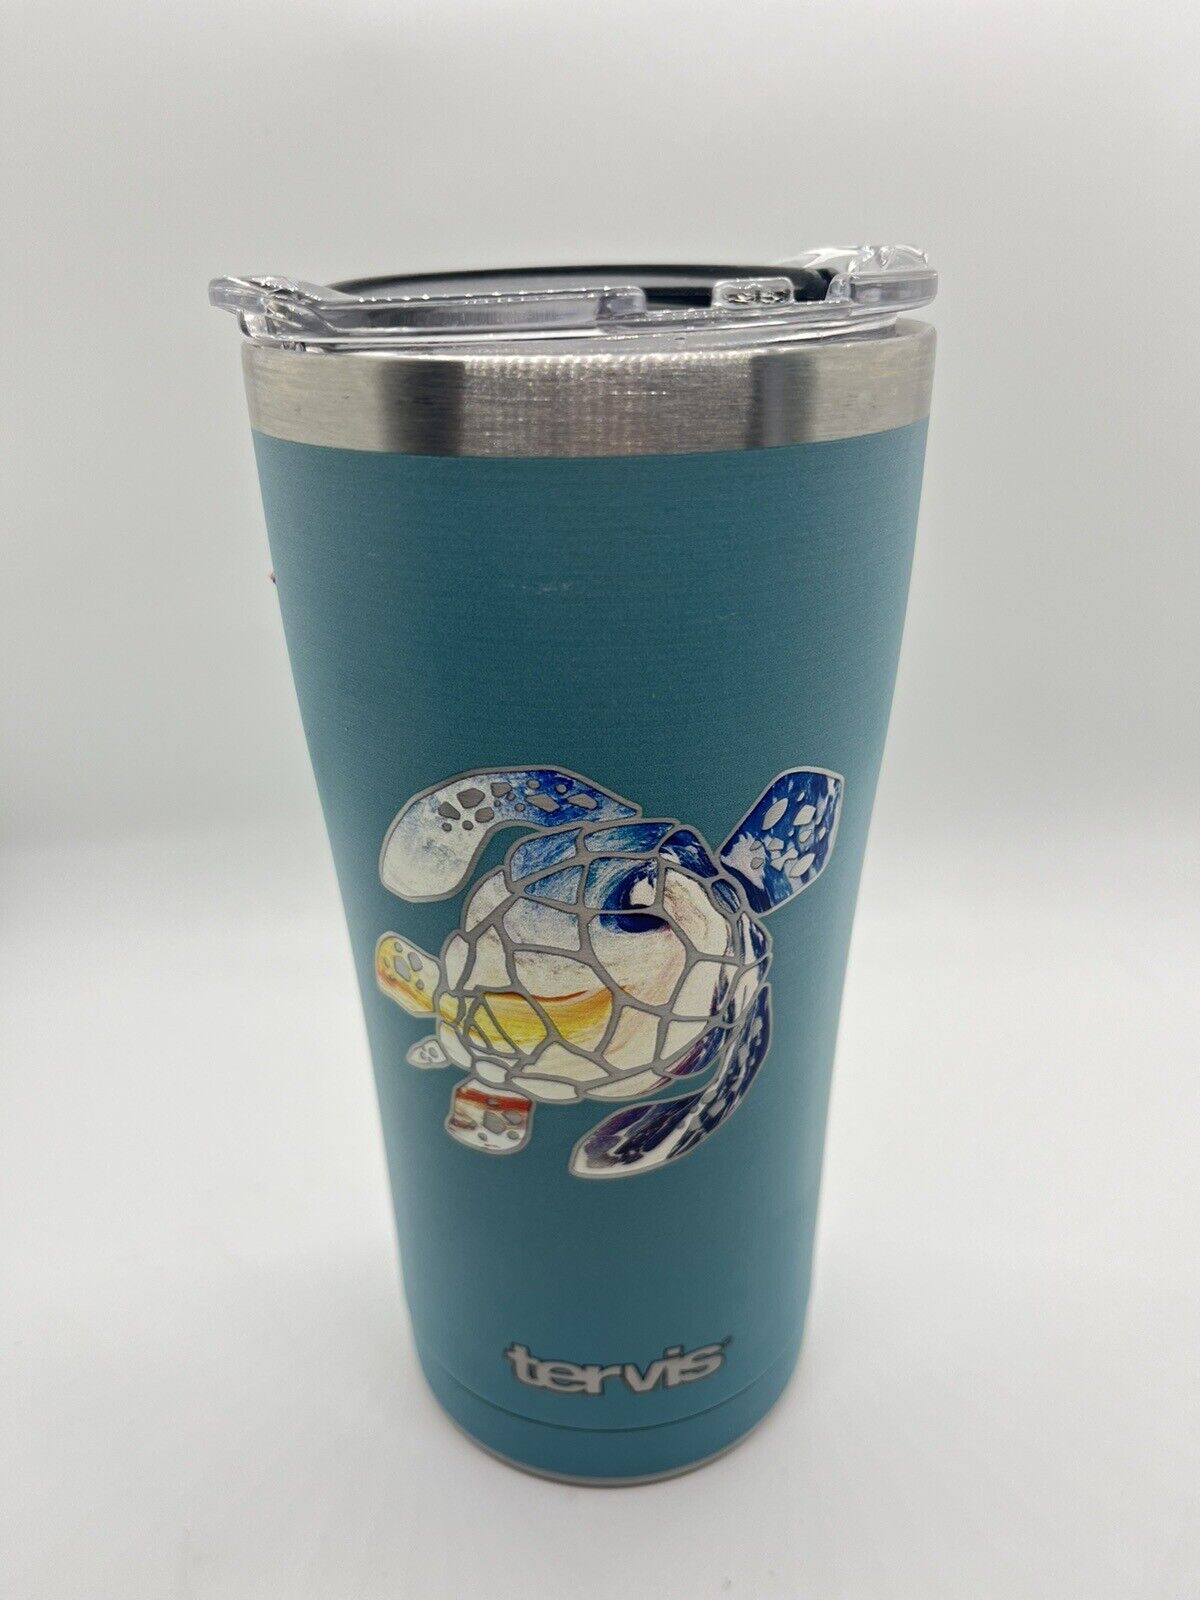 Tervis Turtle Tumbler Cup 8 Hours Hot 24 Hours Cold  30 Oz. 18/8 Stainless Steel